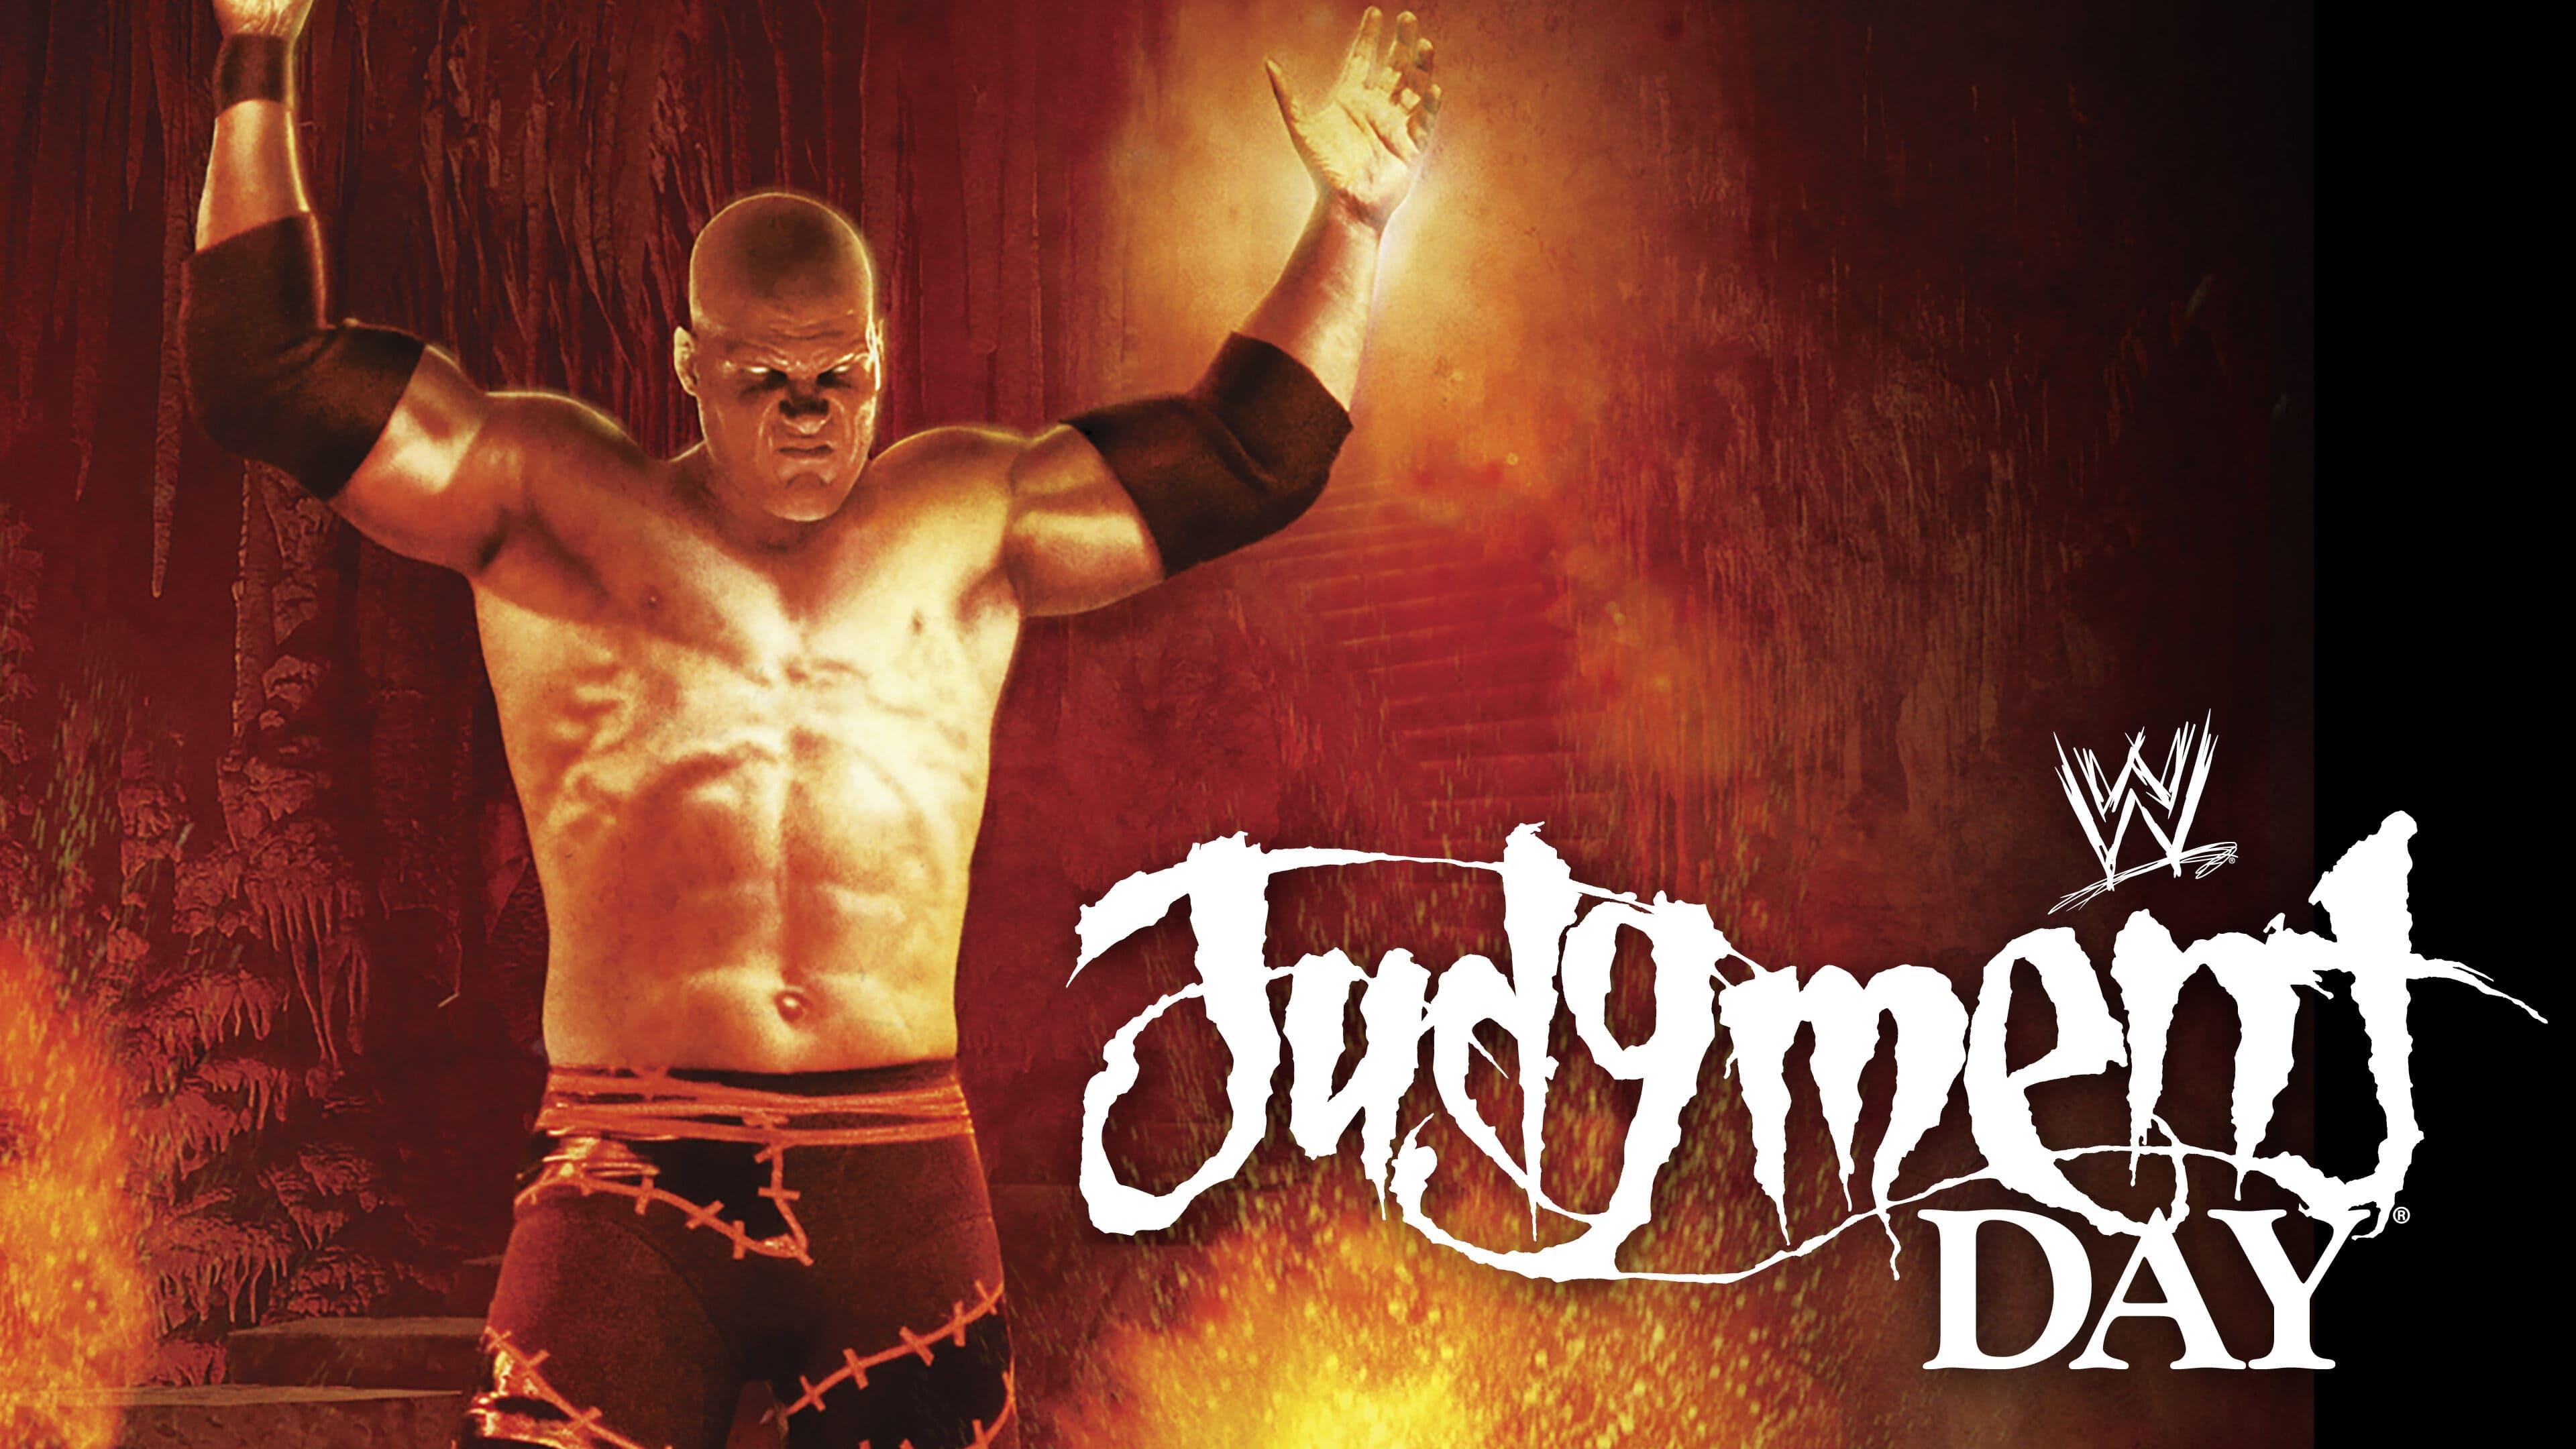 WWE Judgment Day 2007 backdrop